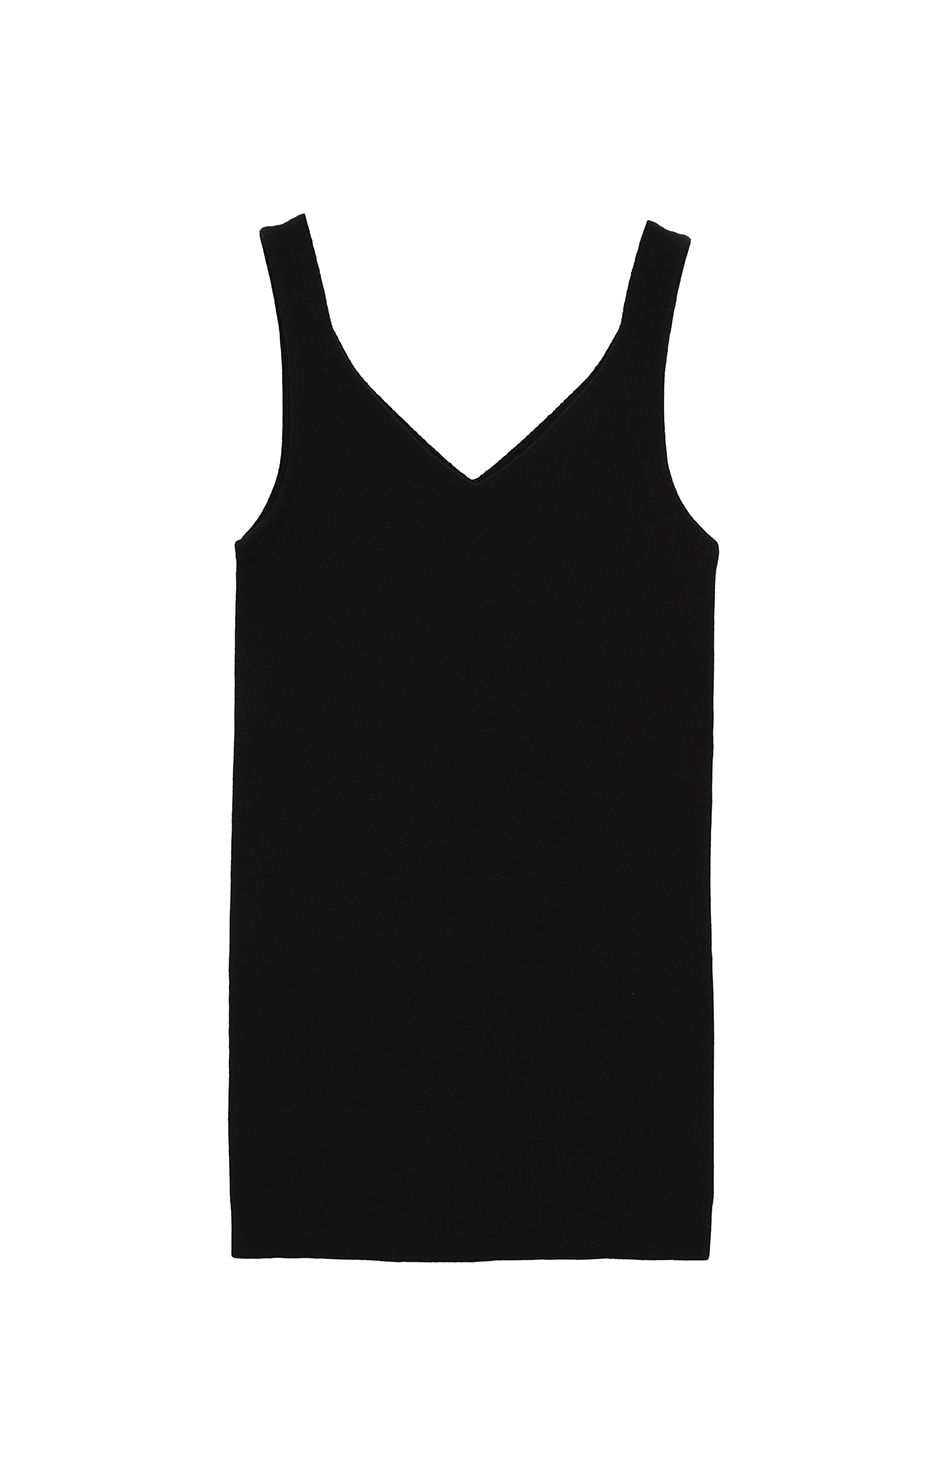 V/N TIGHT LONG TANK TOPS｜TOPS(トップス)｜CLANE OFFICIAL ONLINE STORE